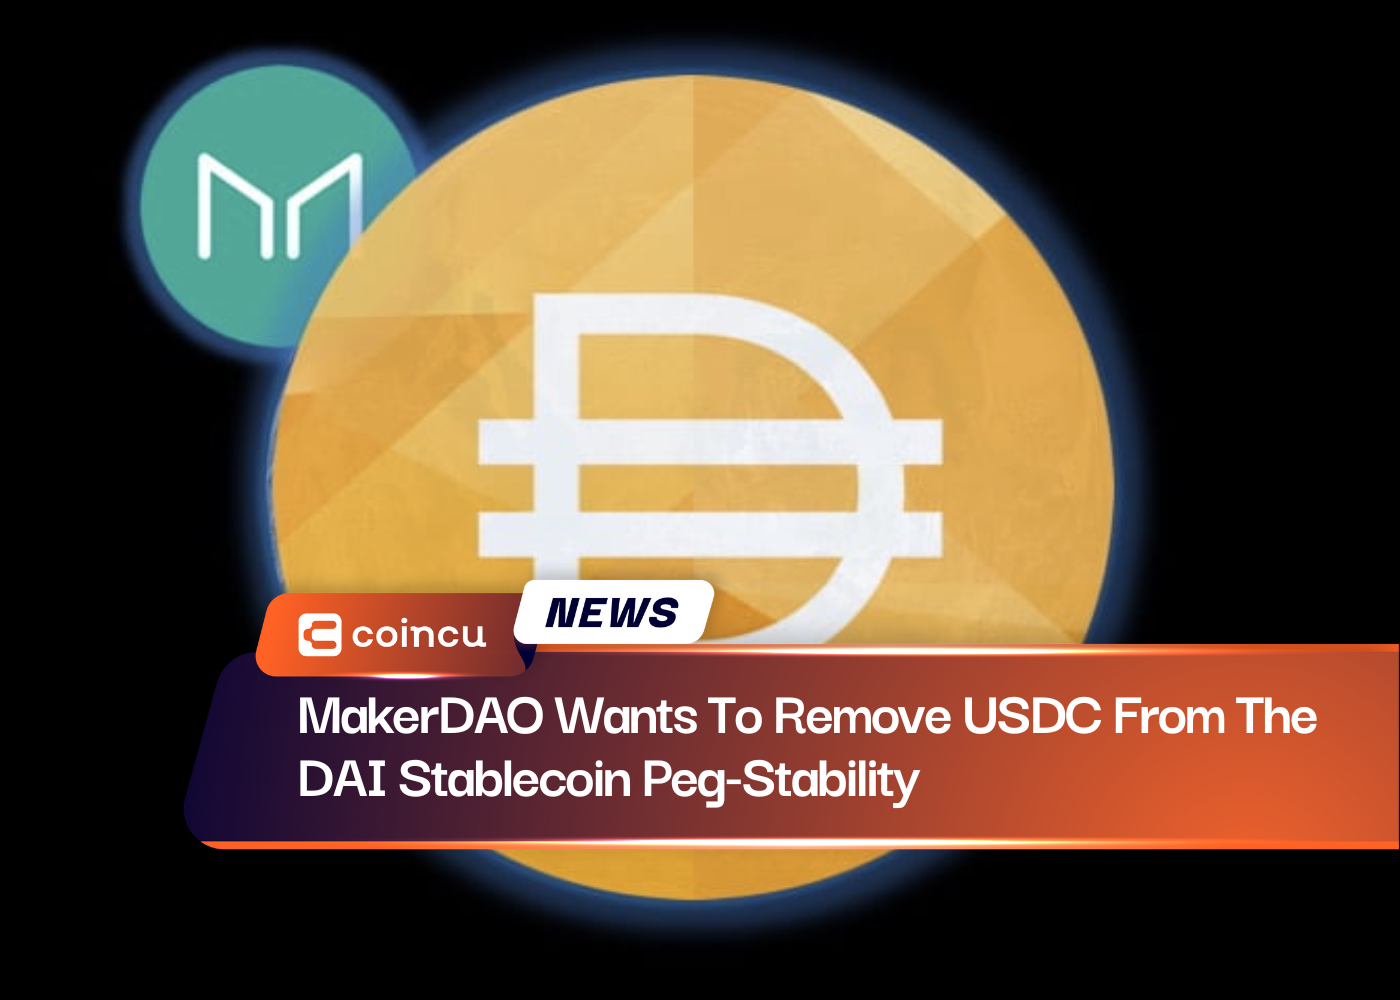 MakerDAO Wants To Remove USDC From The DAI Stablecoin Peg-Stability